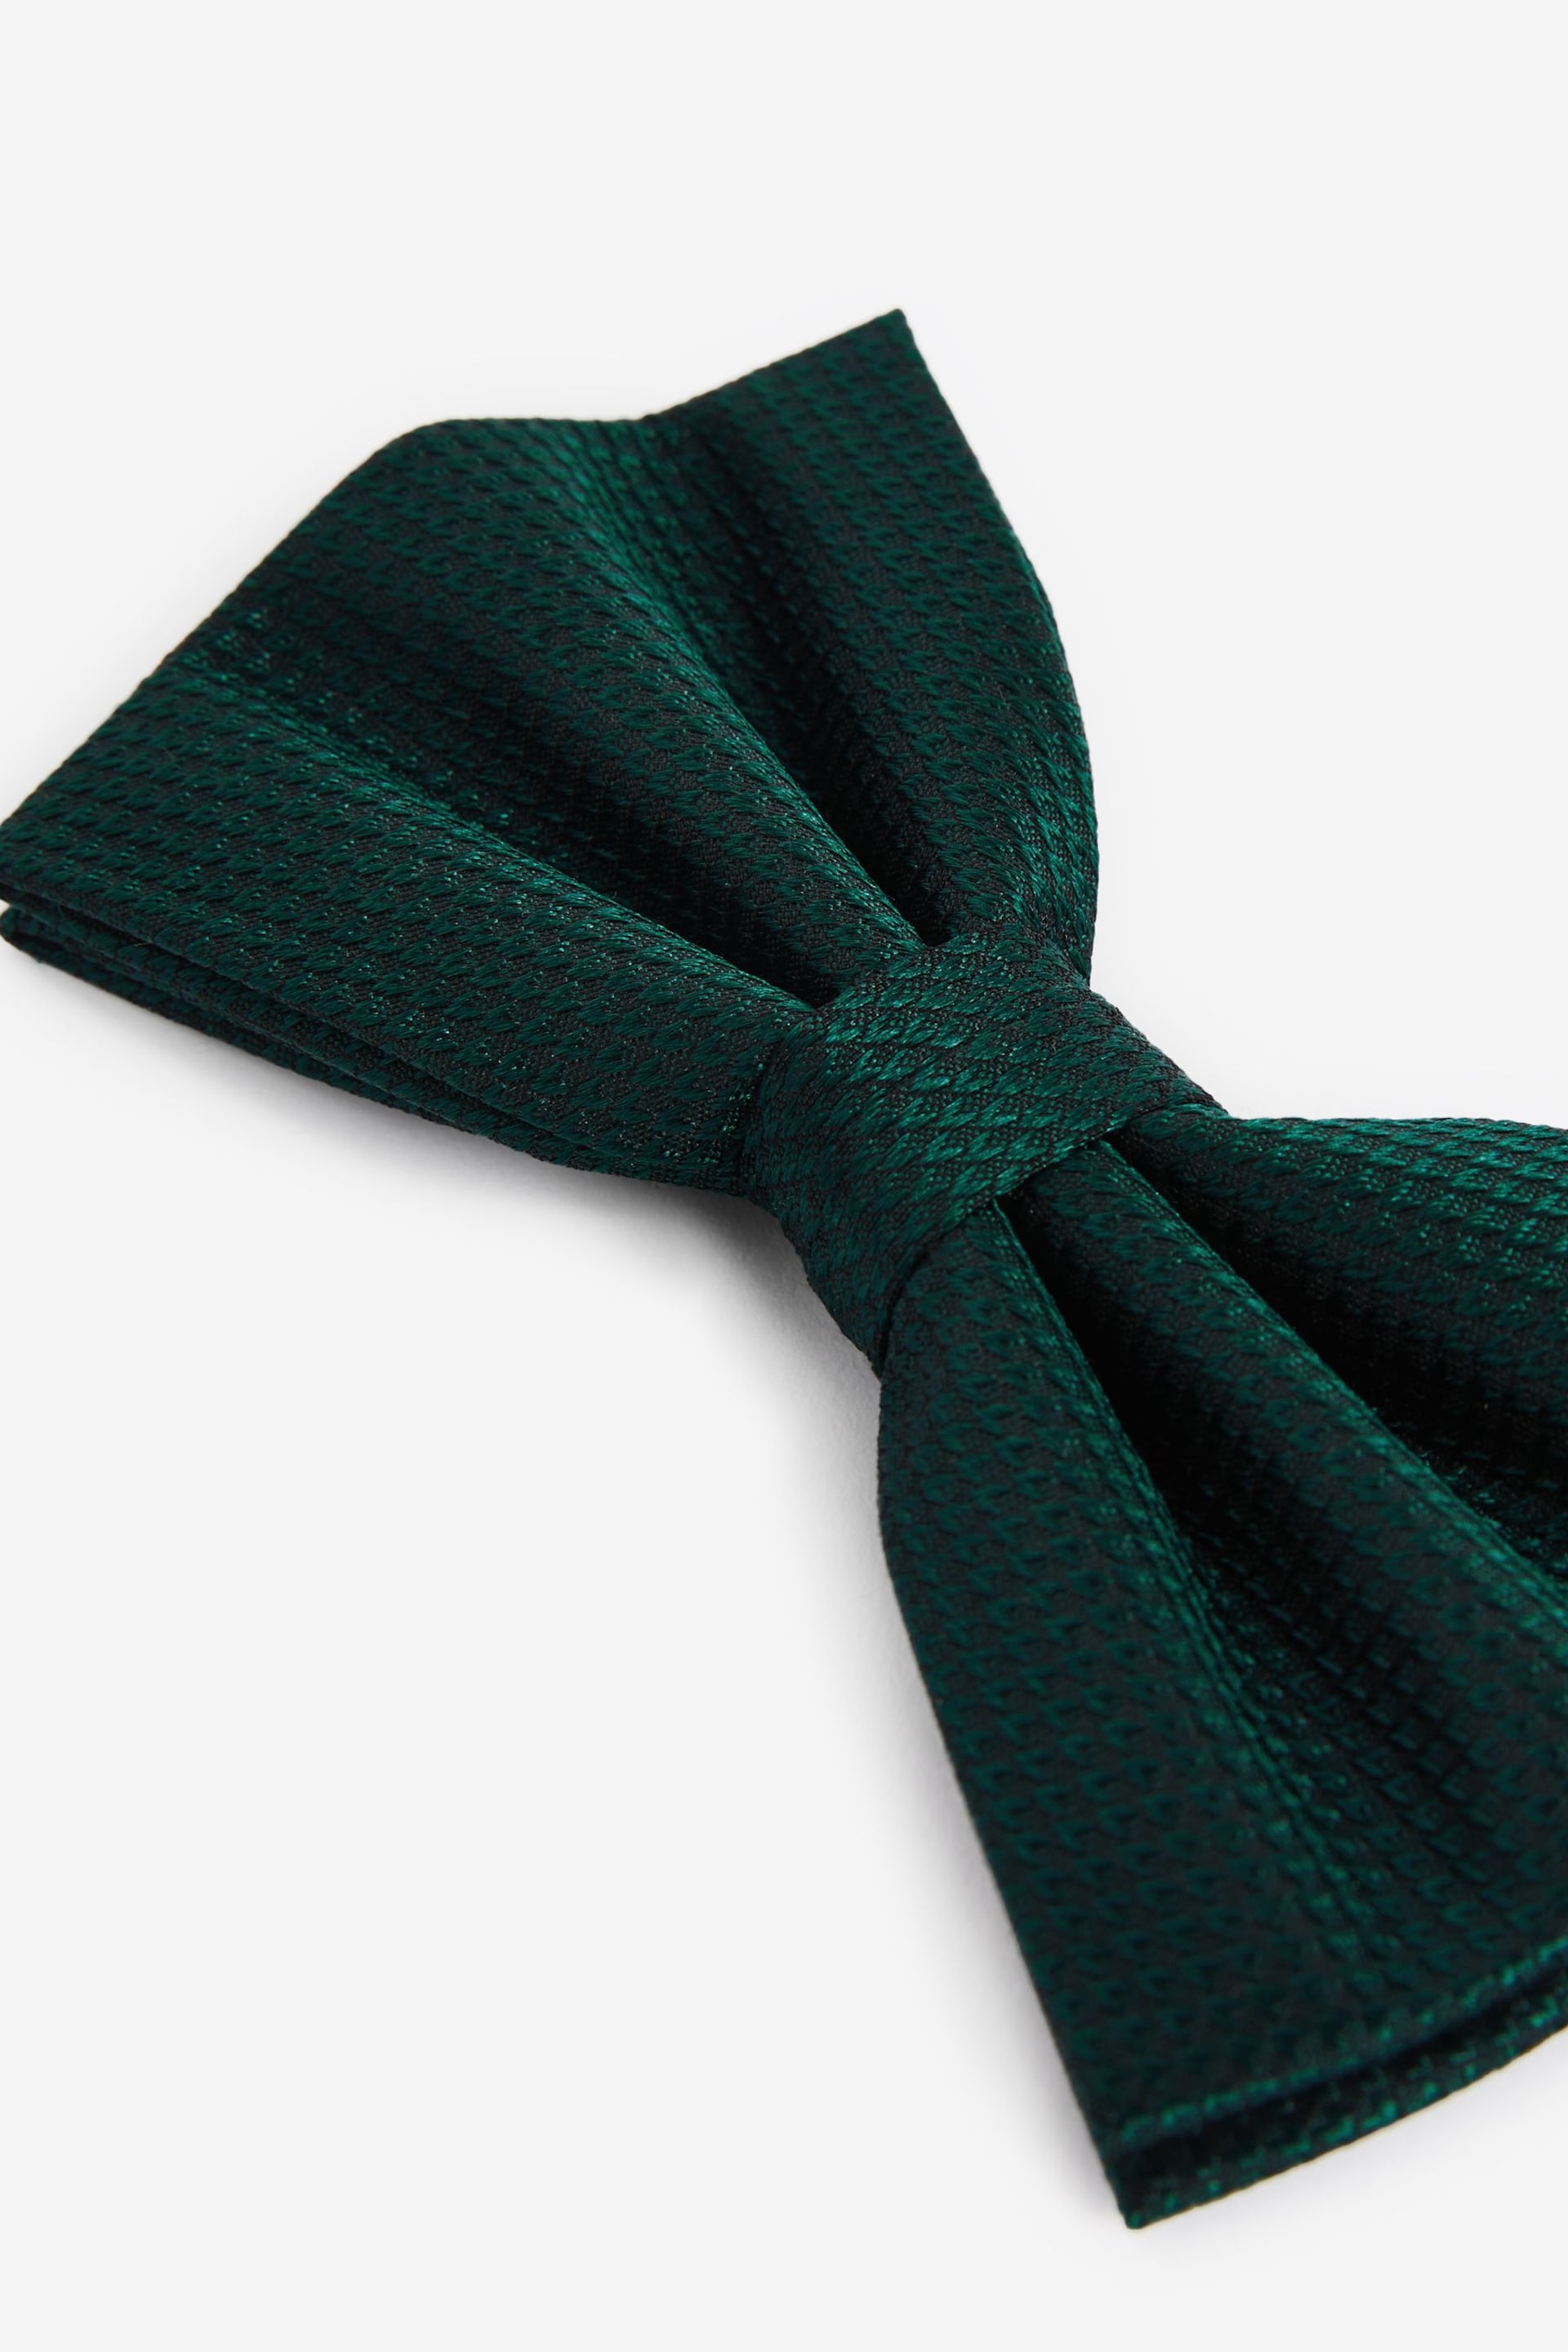 Forest Green Textured Silk Bow Tie - Image 4 of 4